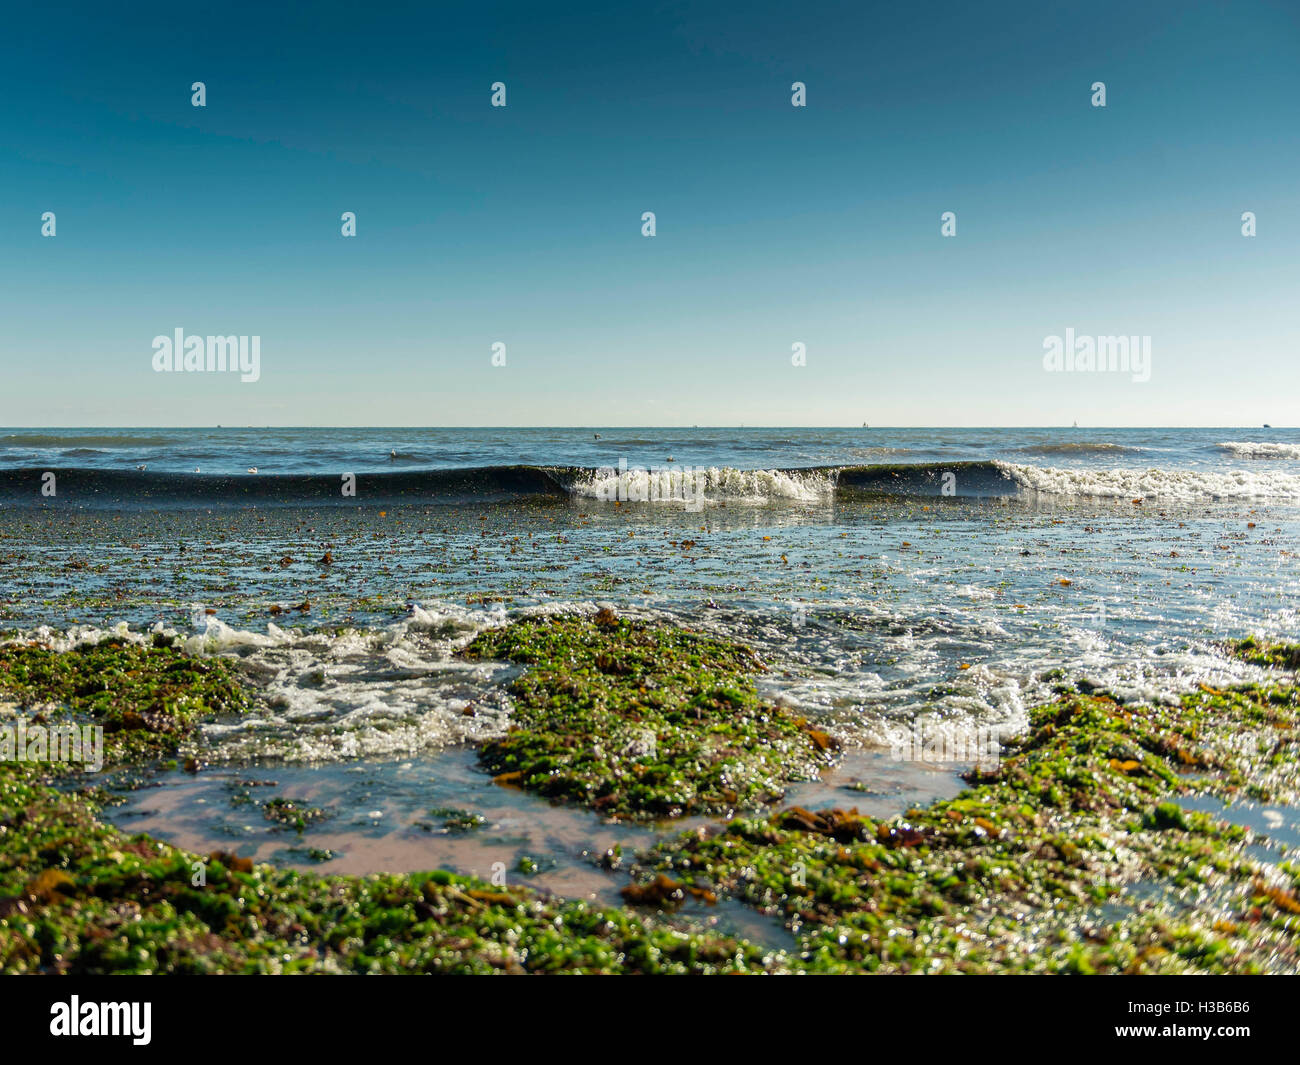 Autumn sunshine, blue skies, sand, seaweed, rock pools and gullies visible at low tide near the seaside town of Exmouth, Devon. Stock Photo